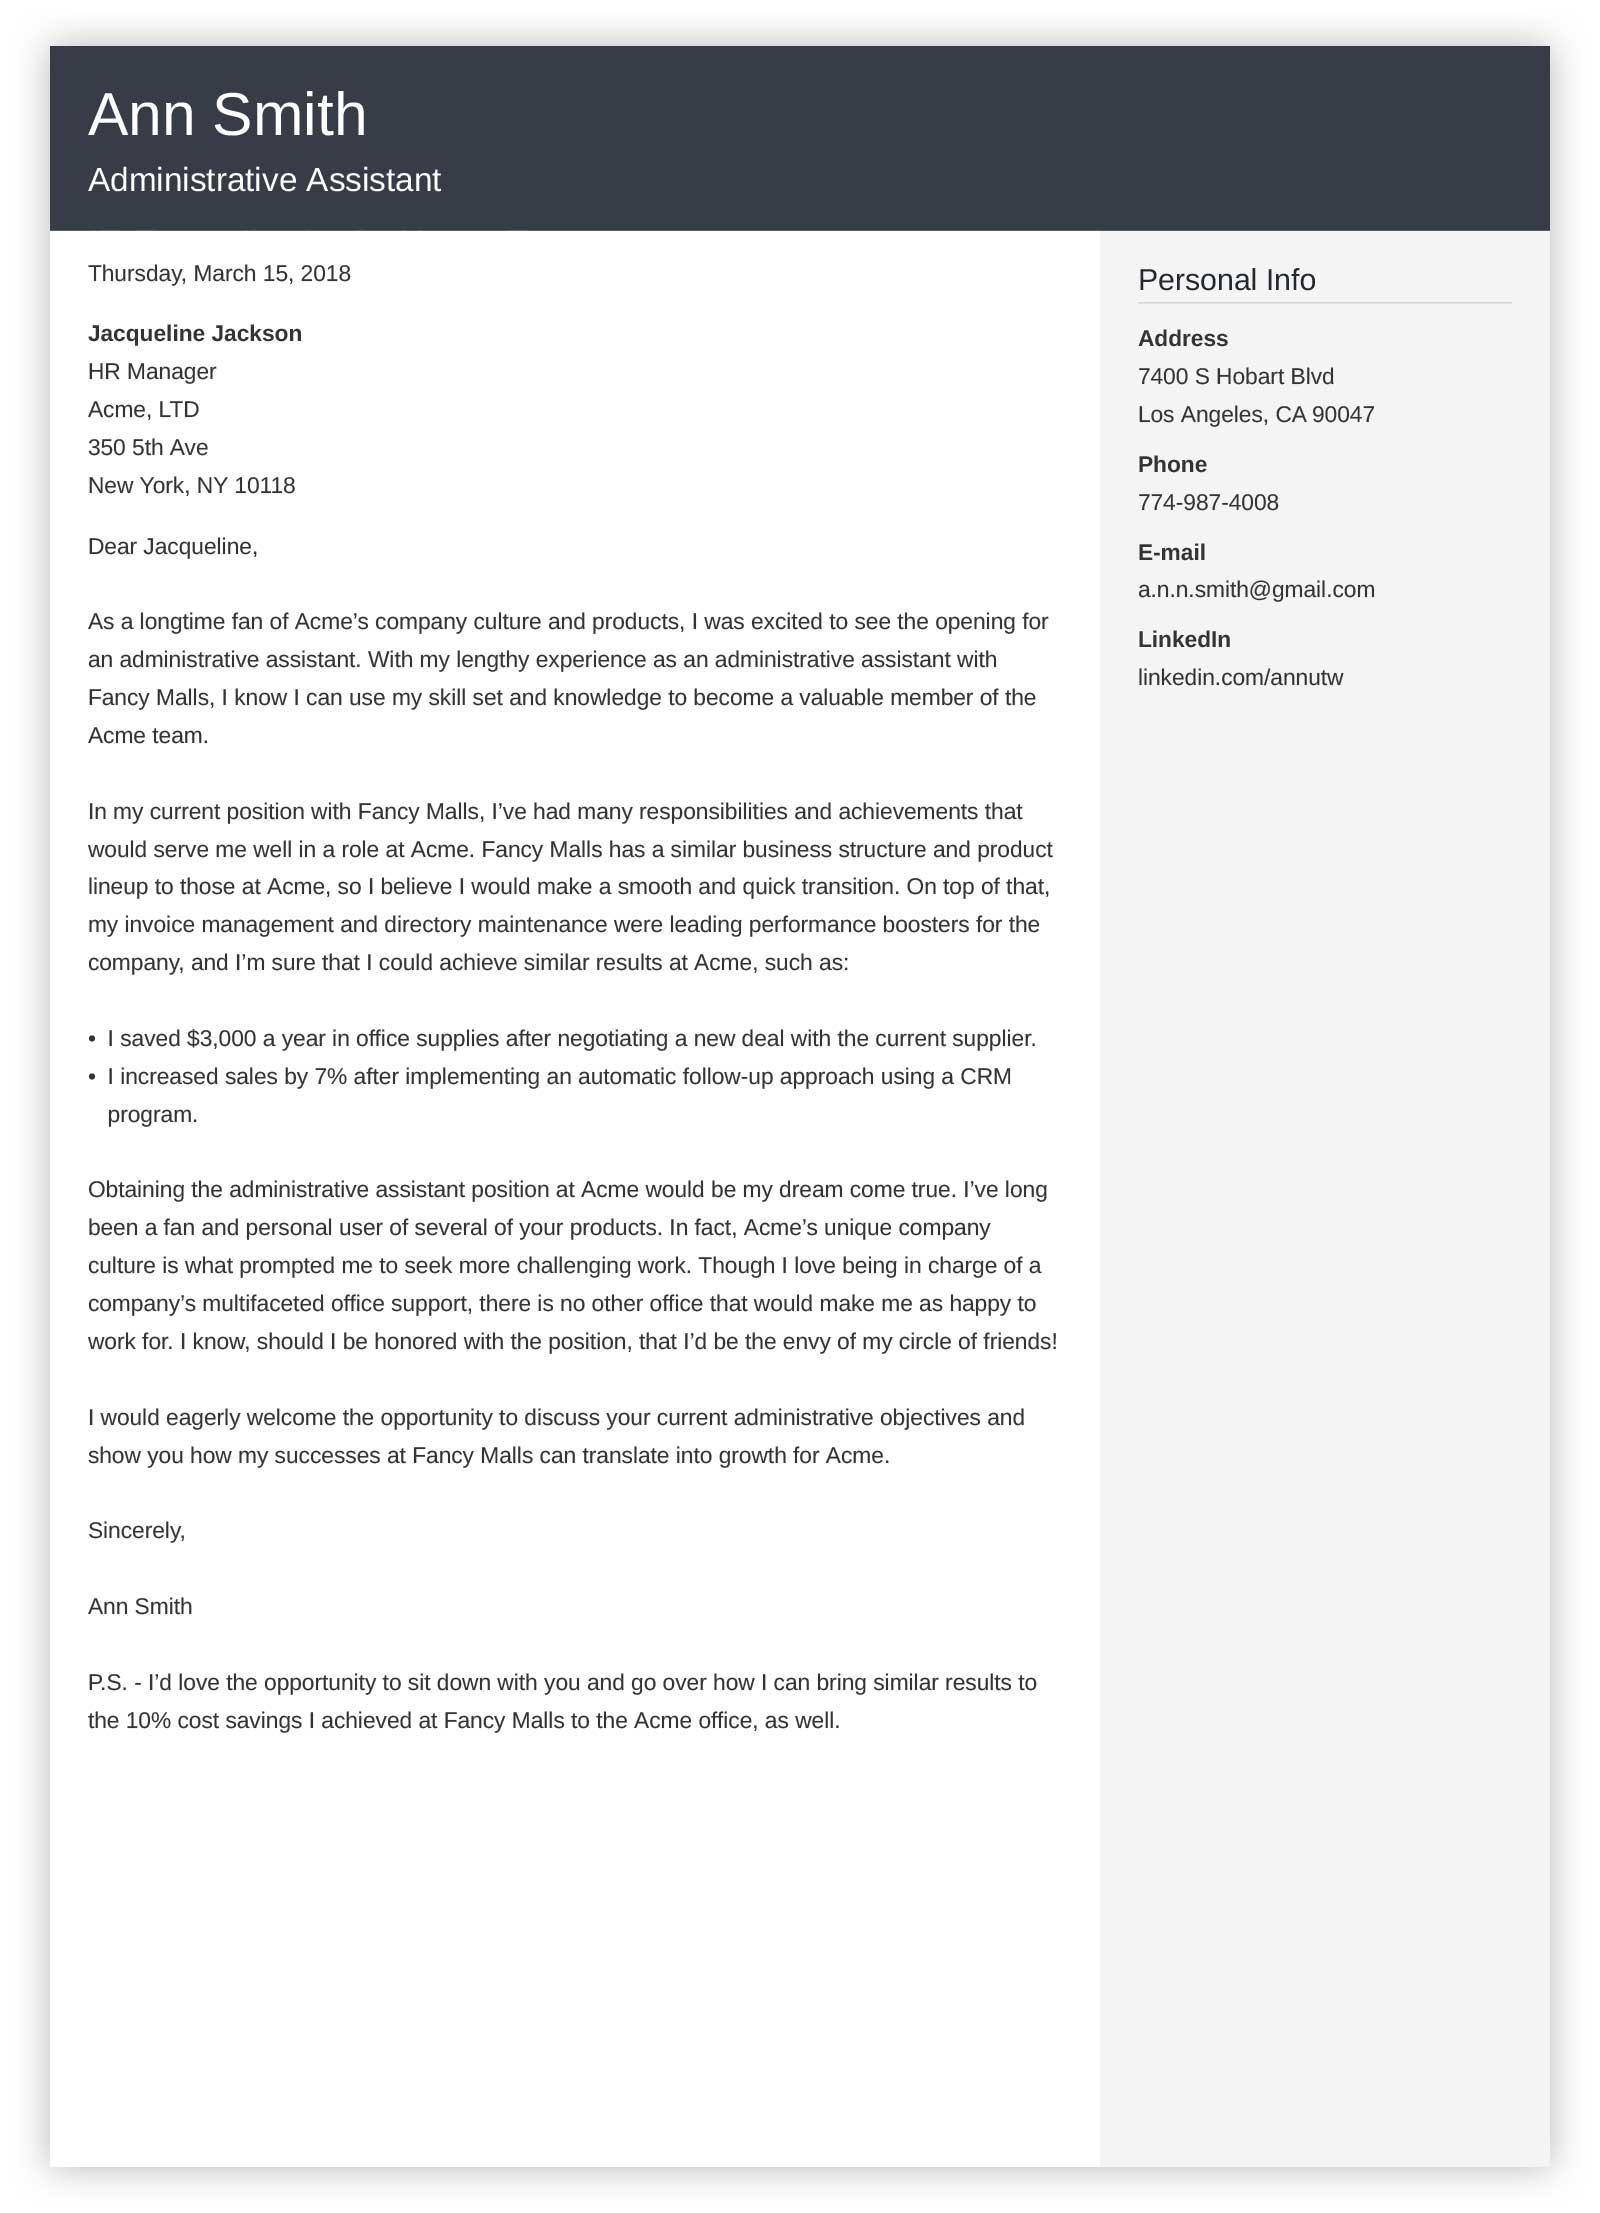 administrative assistant resume and cover letter set